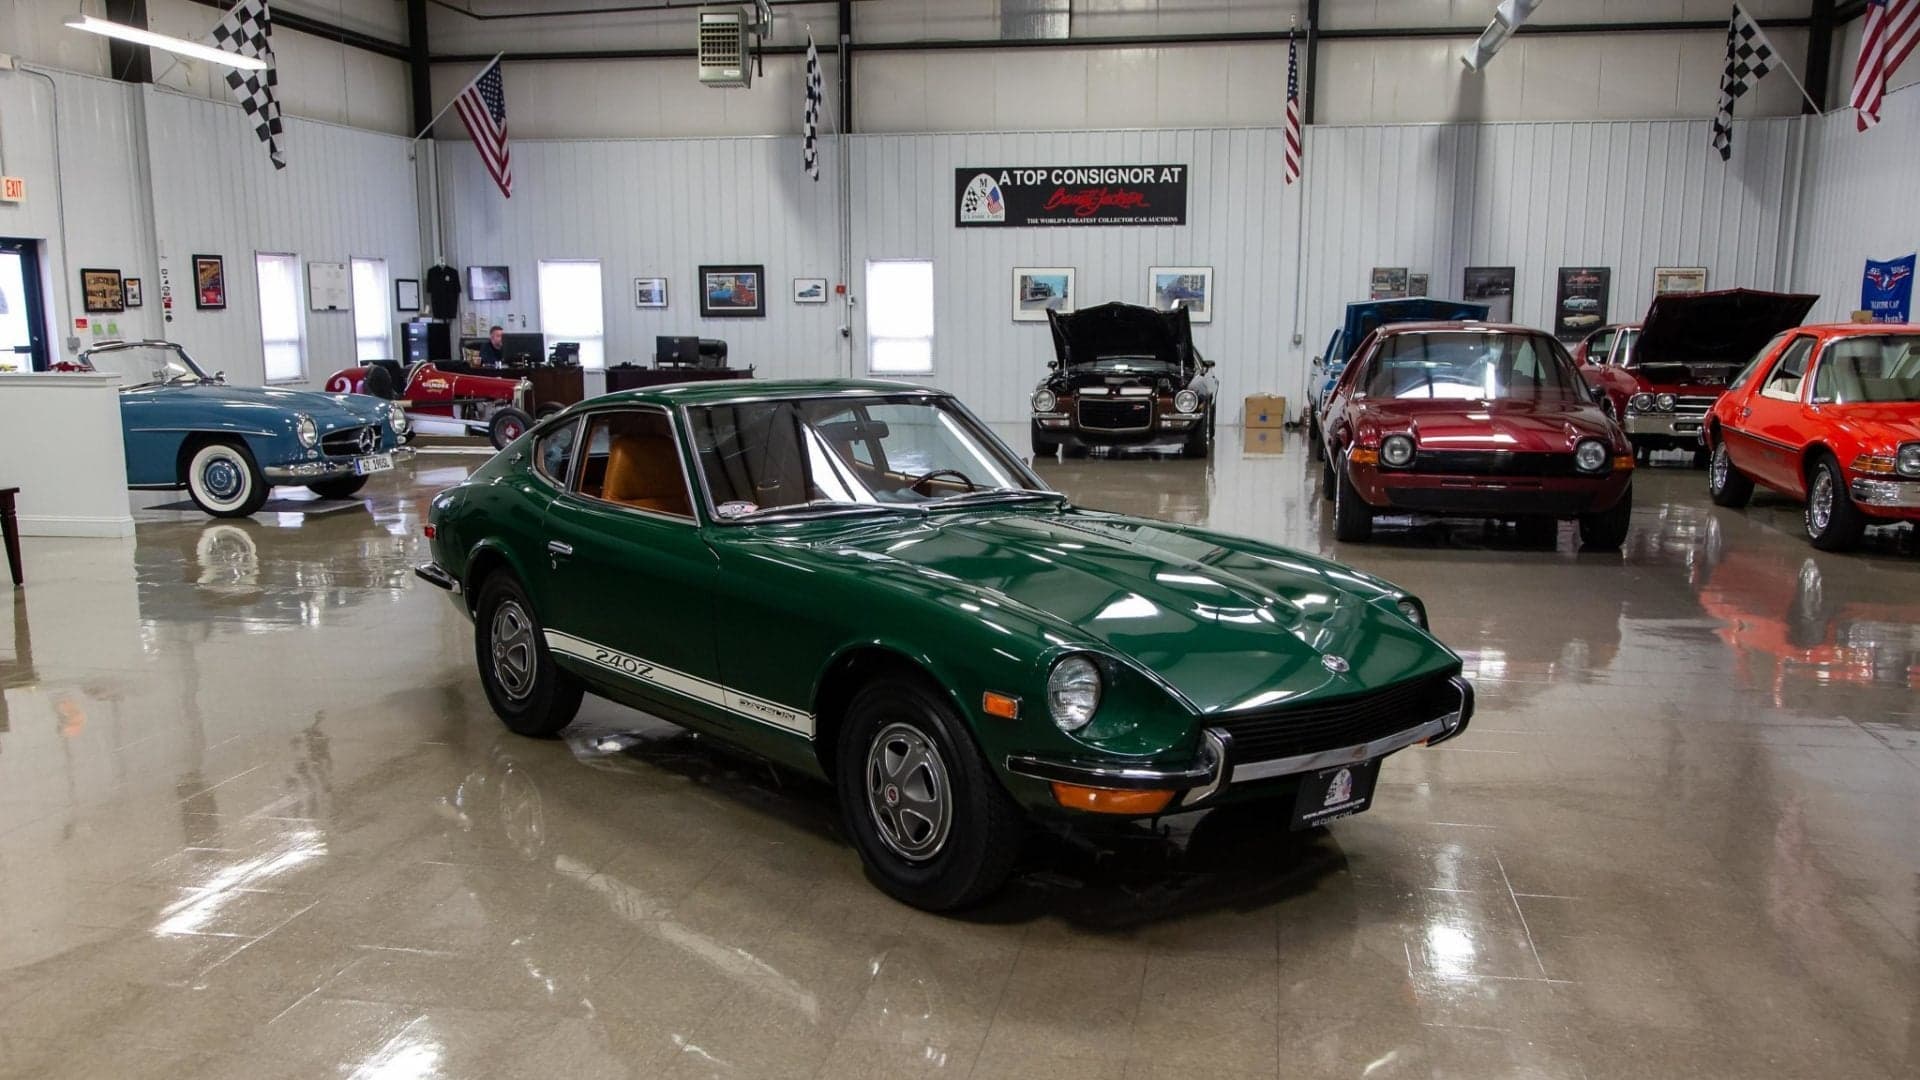 A Pristine 1971 Datsun 240Z Just Sold for $310,000 Because the World’s Gone Mad